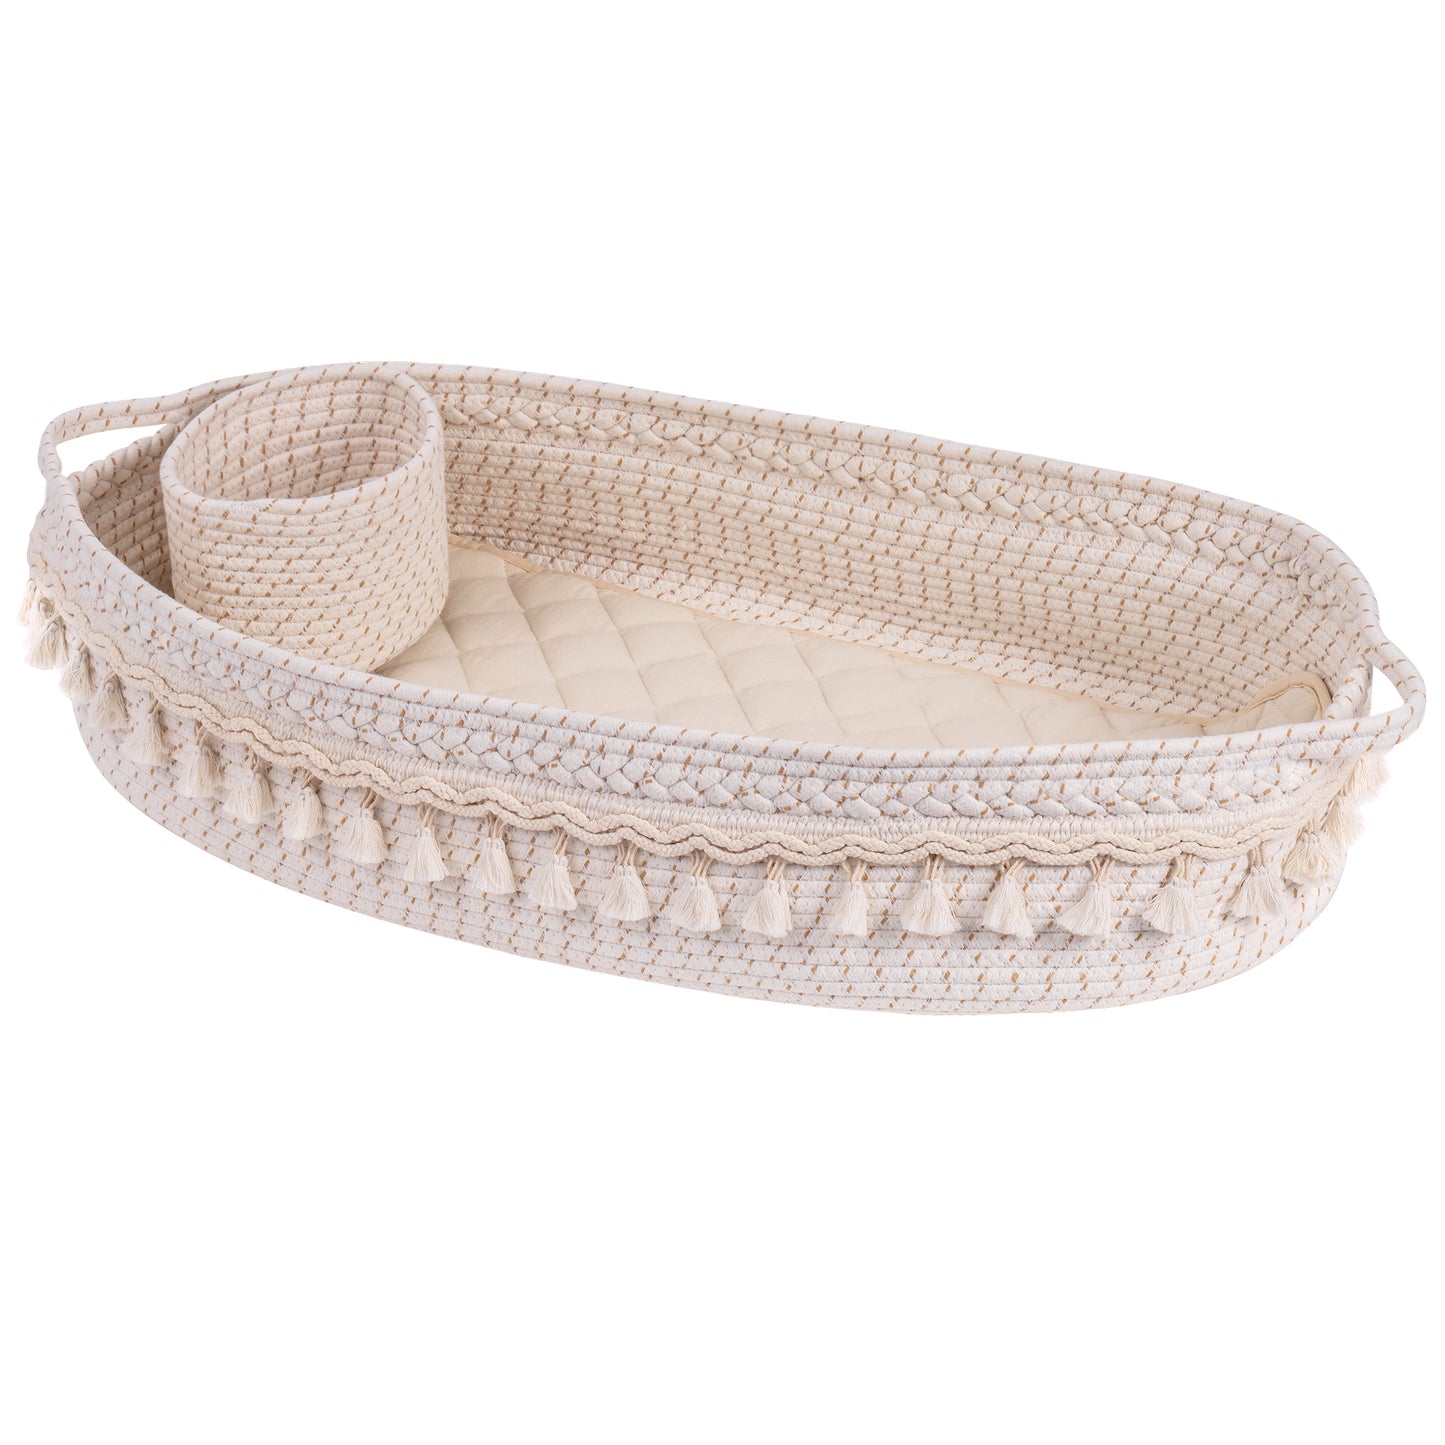 Baby Changing Basket, Handmade Woven Cotton Rope Moses Basket, Changing Table Topper with Mattress Pad(White&Brown)